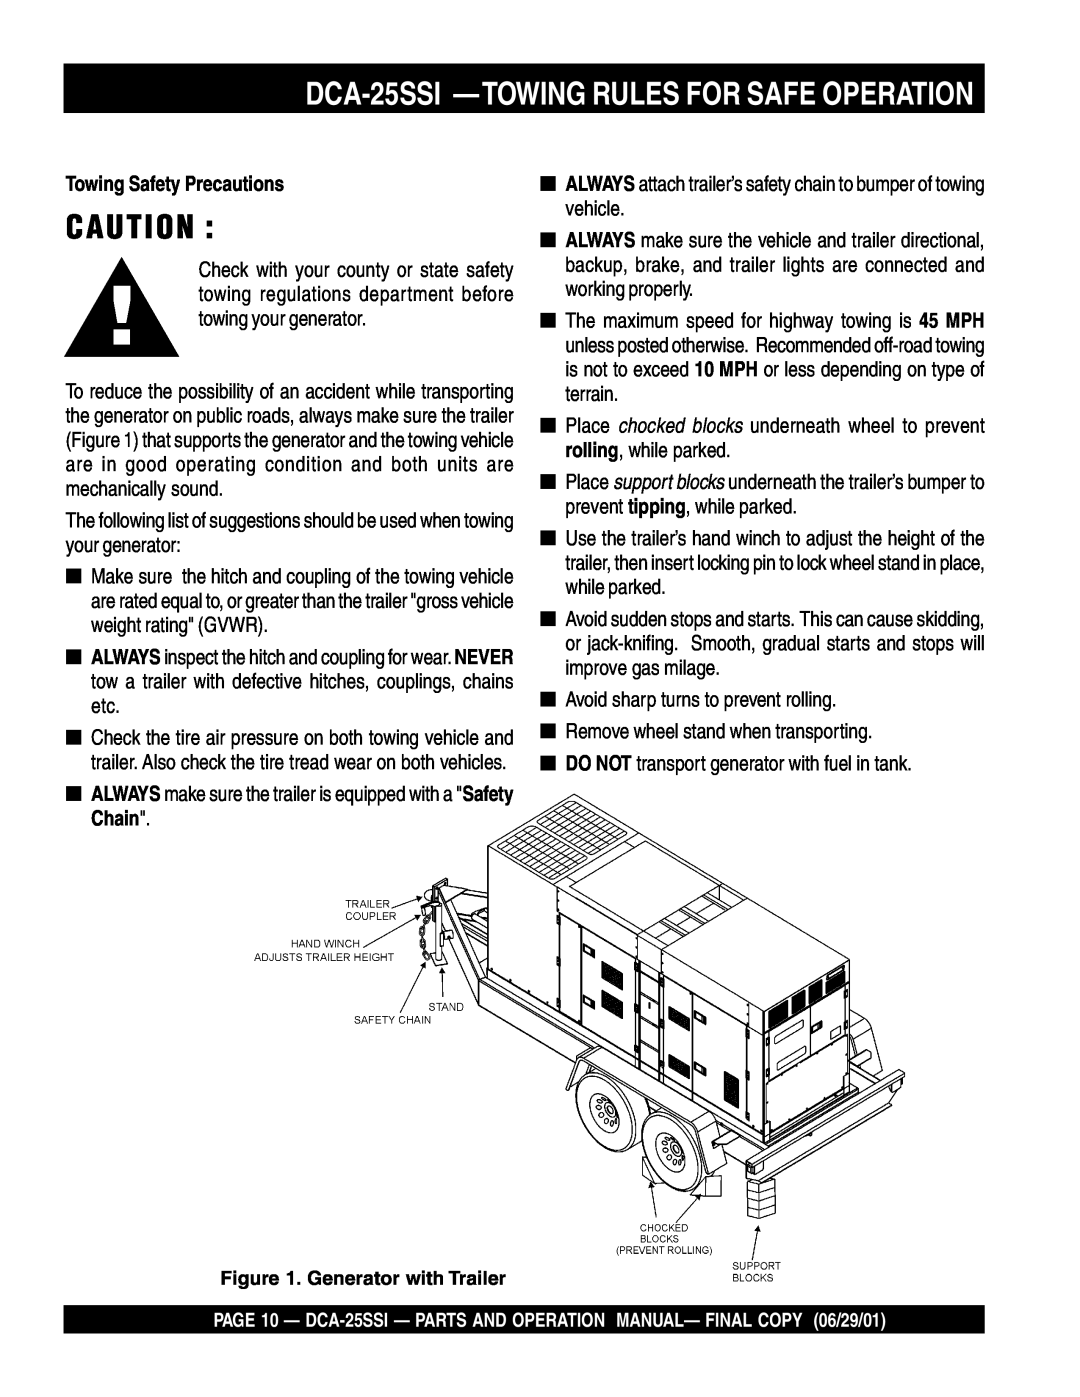 Multiquip operation manual DCA-25SSI —TOWINGRULES FOR SAFE OPERATION, Towing Safety Precautions 